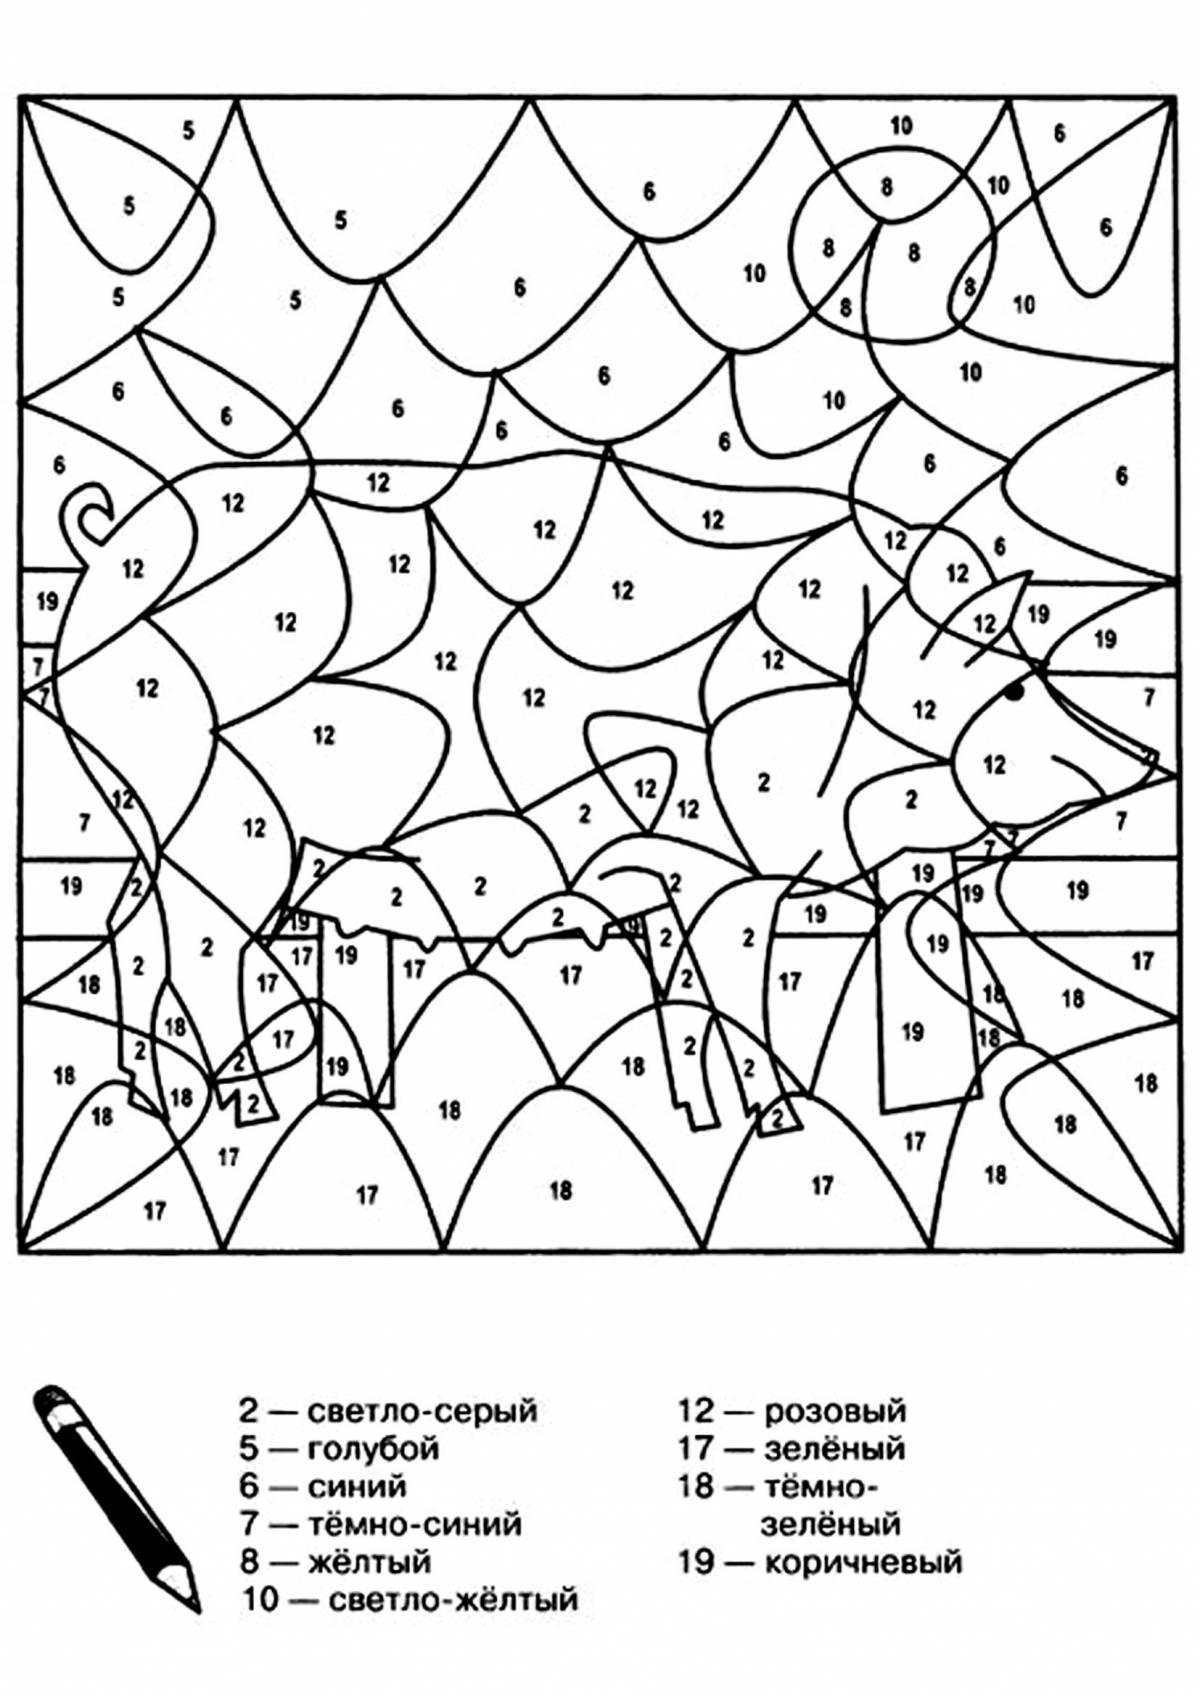 Playful coloring picture by number